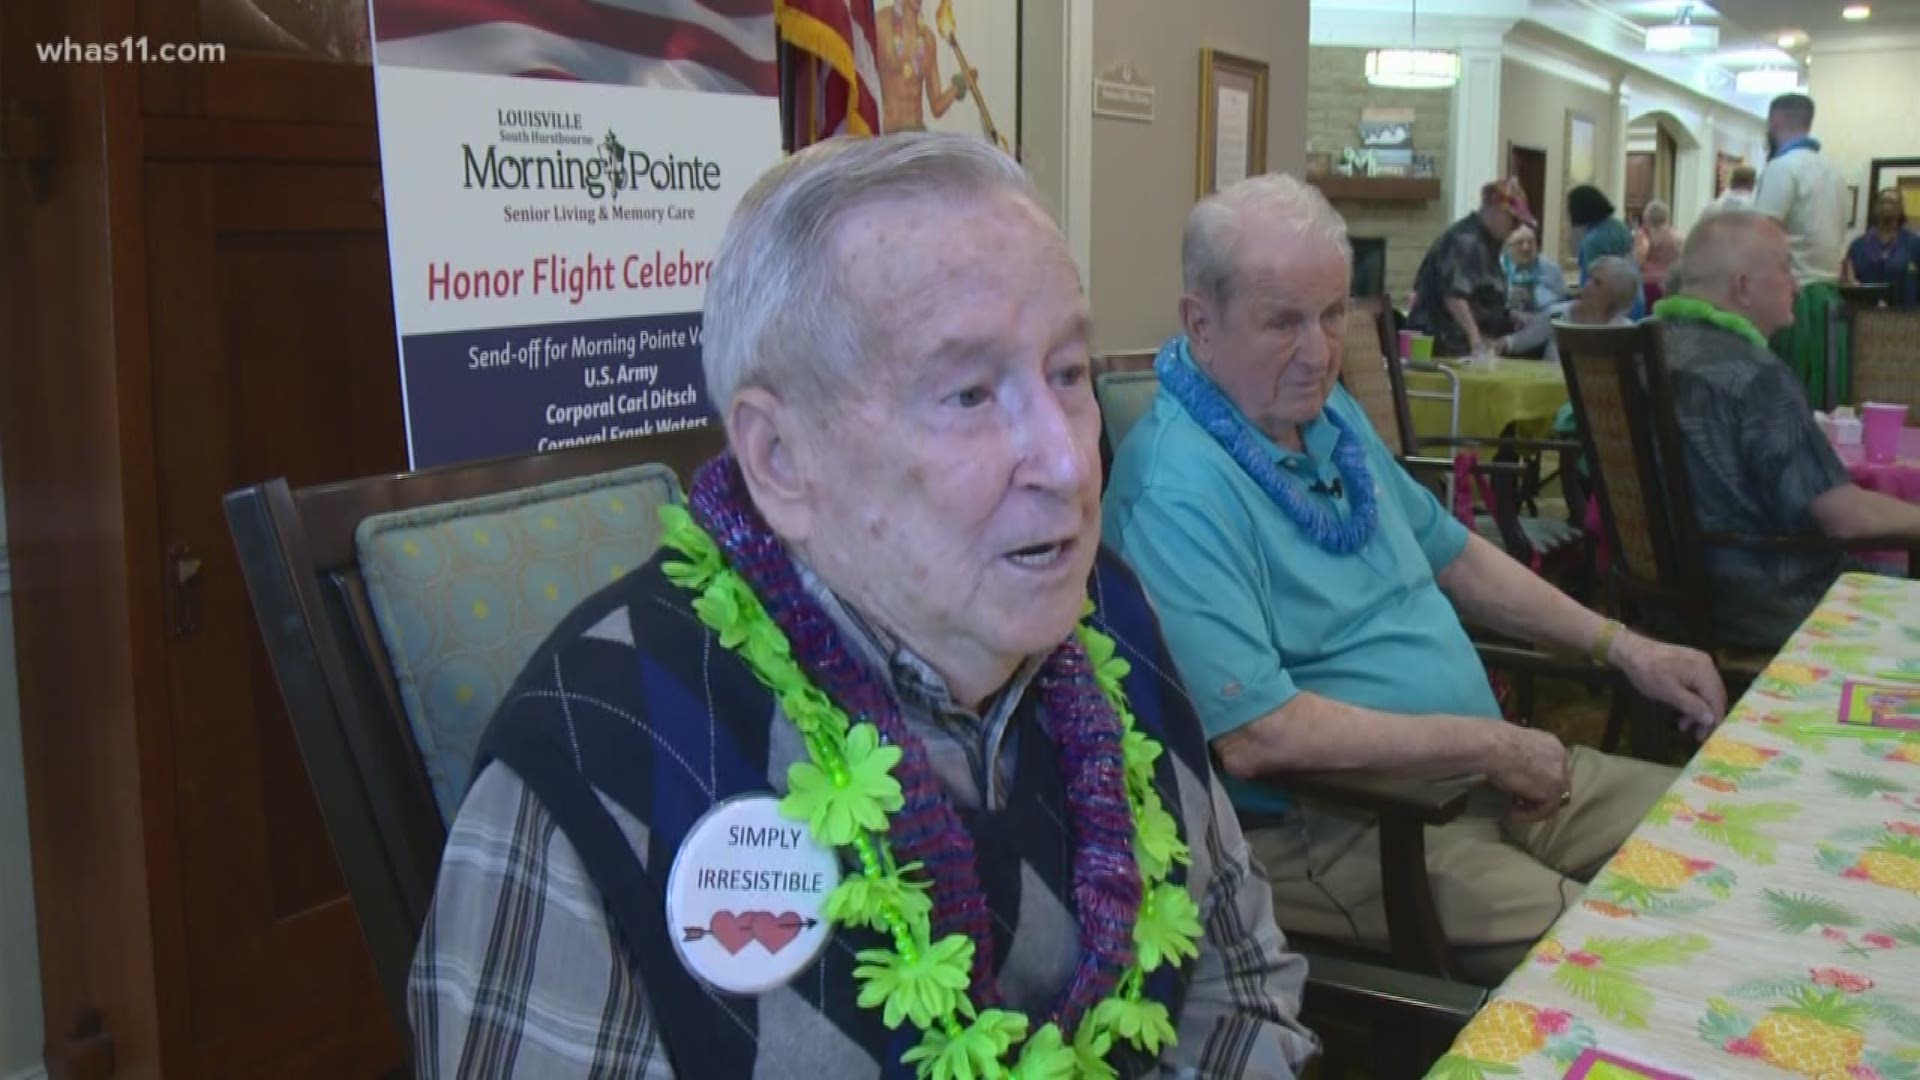 Two WWII veterans now living their best lives at a senior living facility here in Louisville.